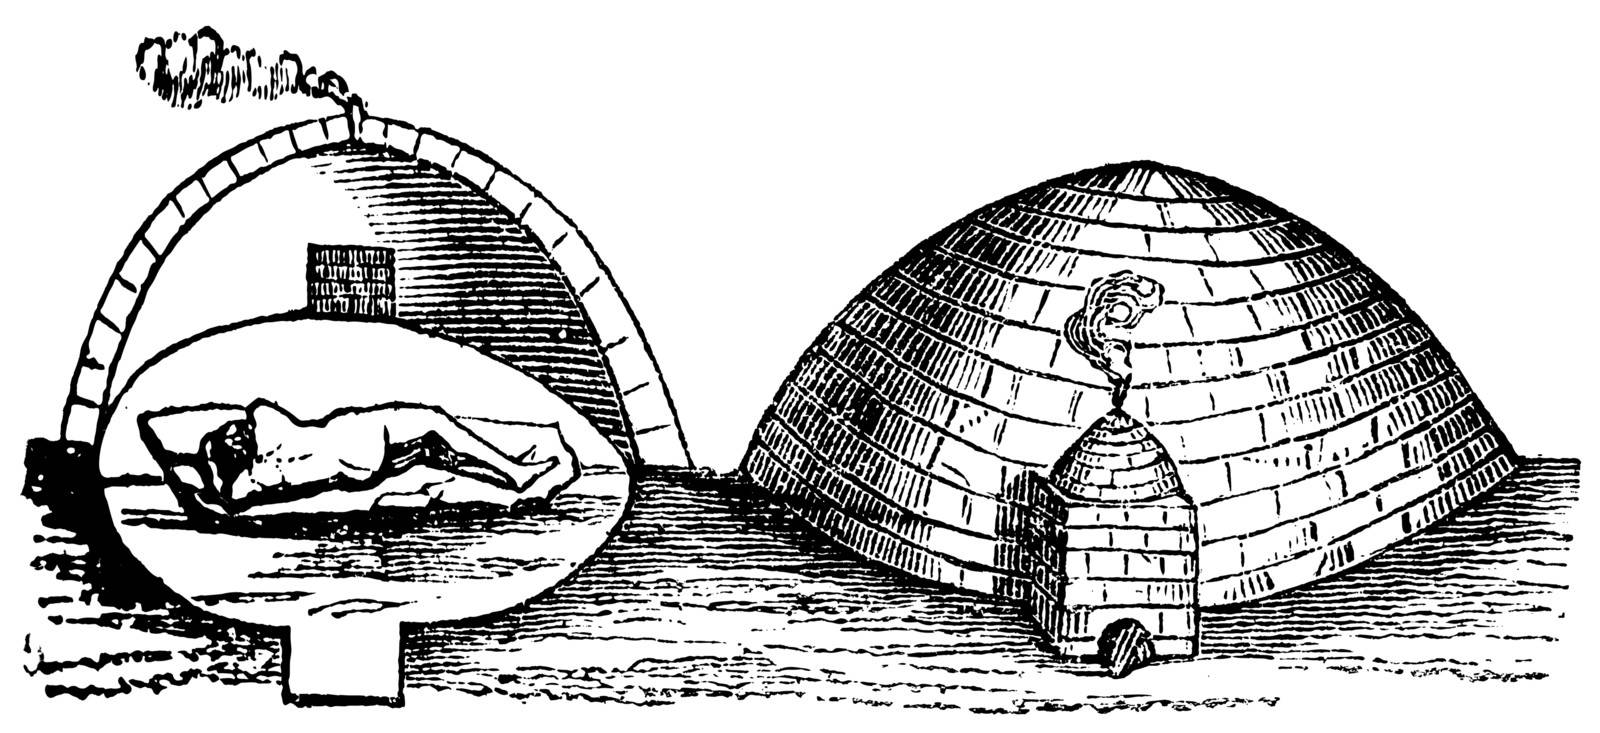 Mexican Vapor Bath or Temazcal, vintage engraving. Old engraved illustration of a Mexican Vapor bath showing cross-section of the chamber (left) and the pit (right).